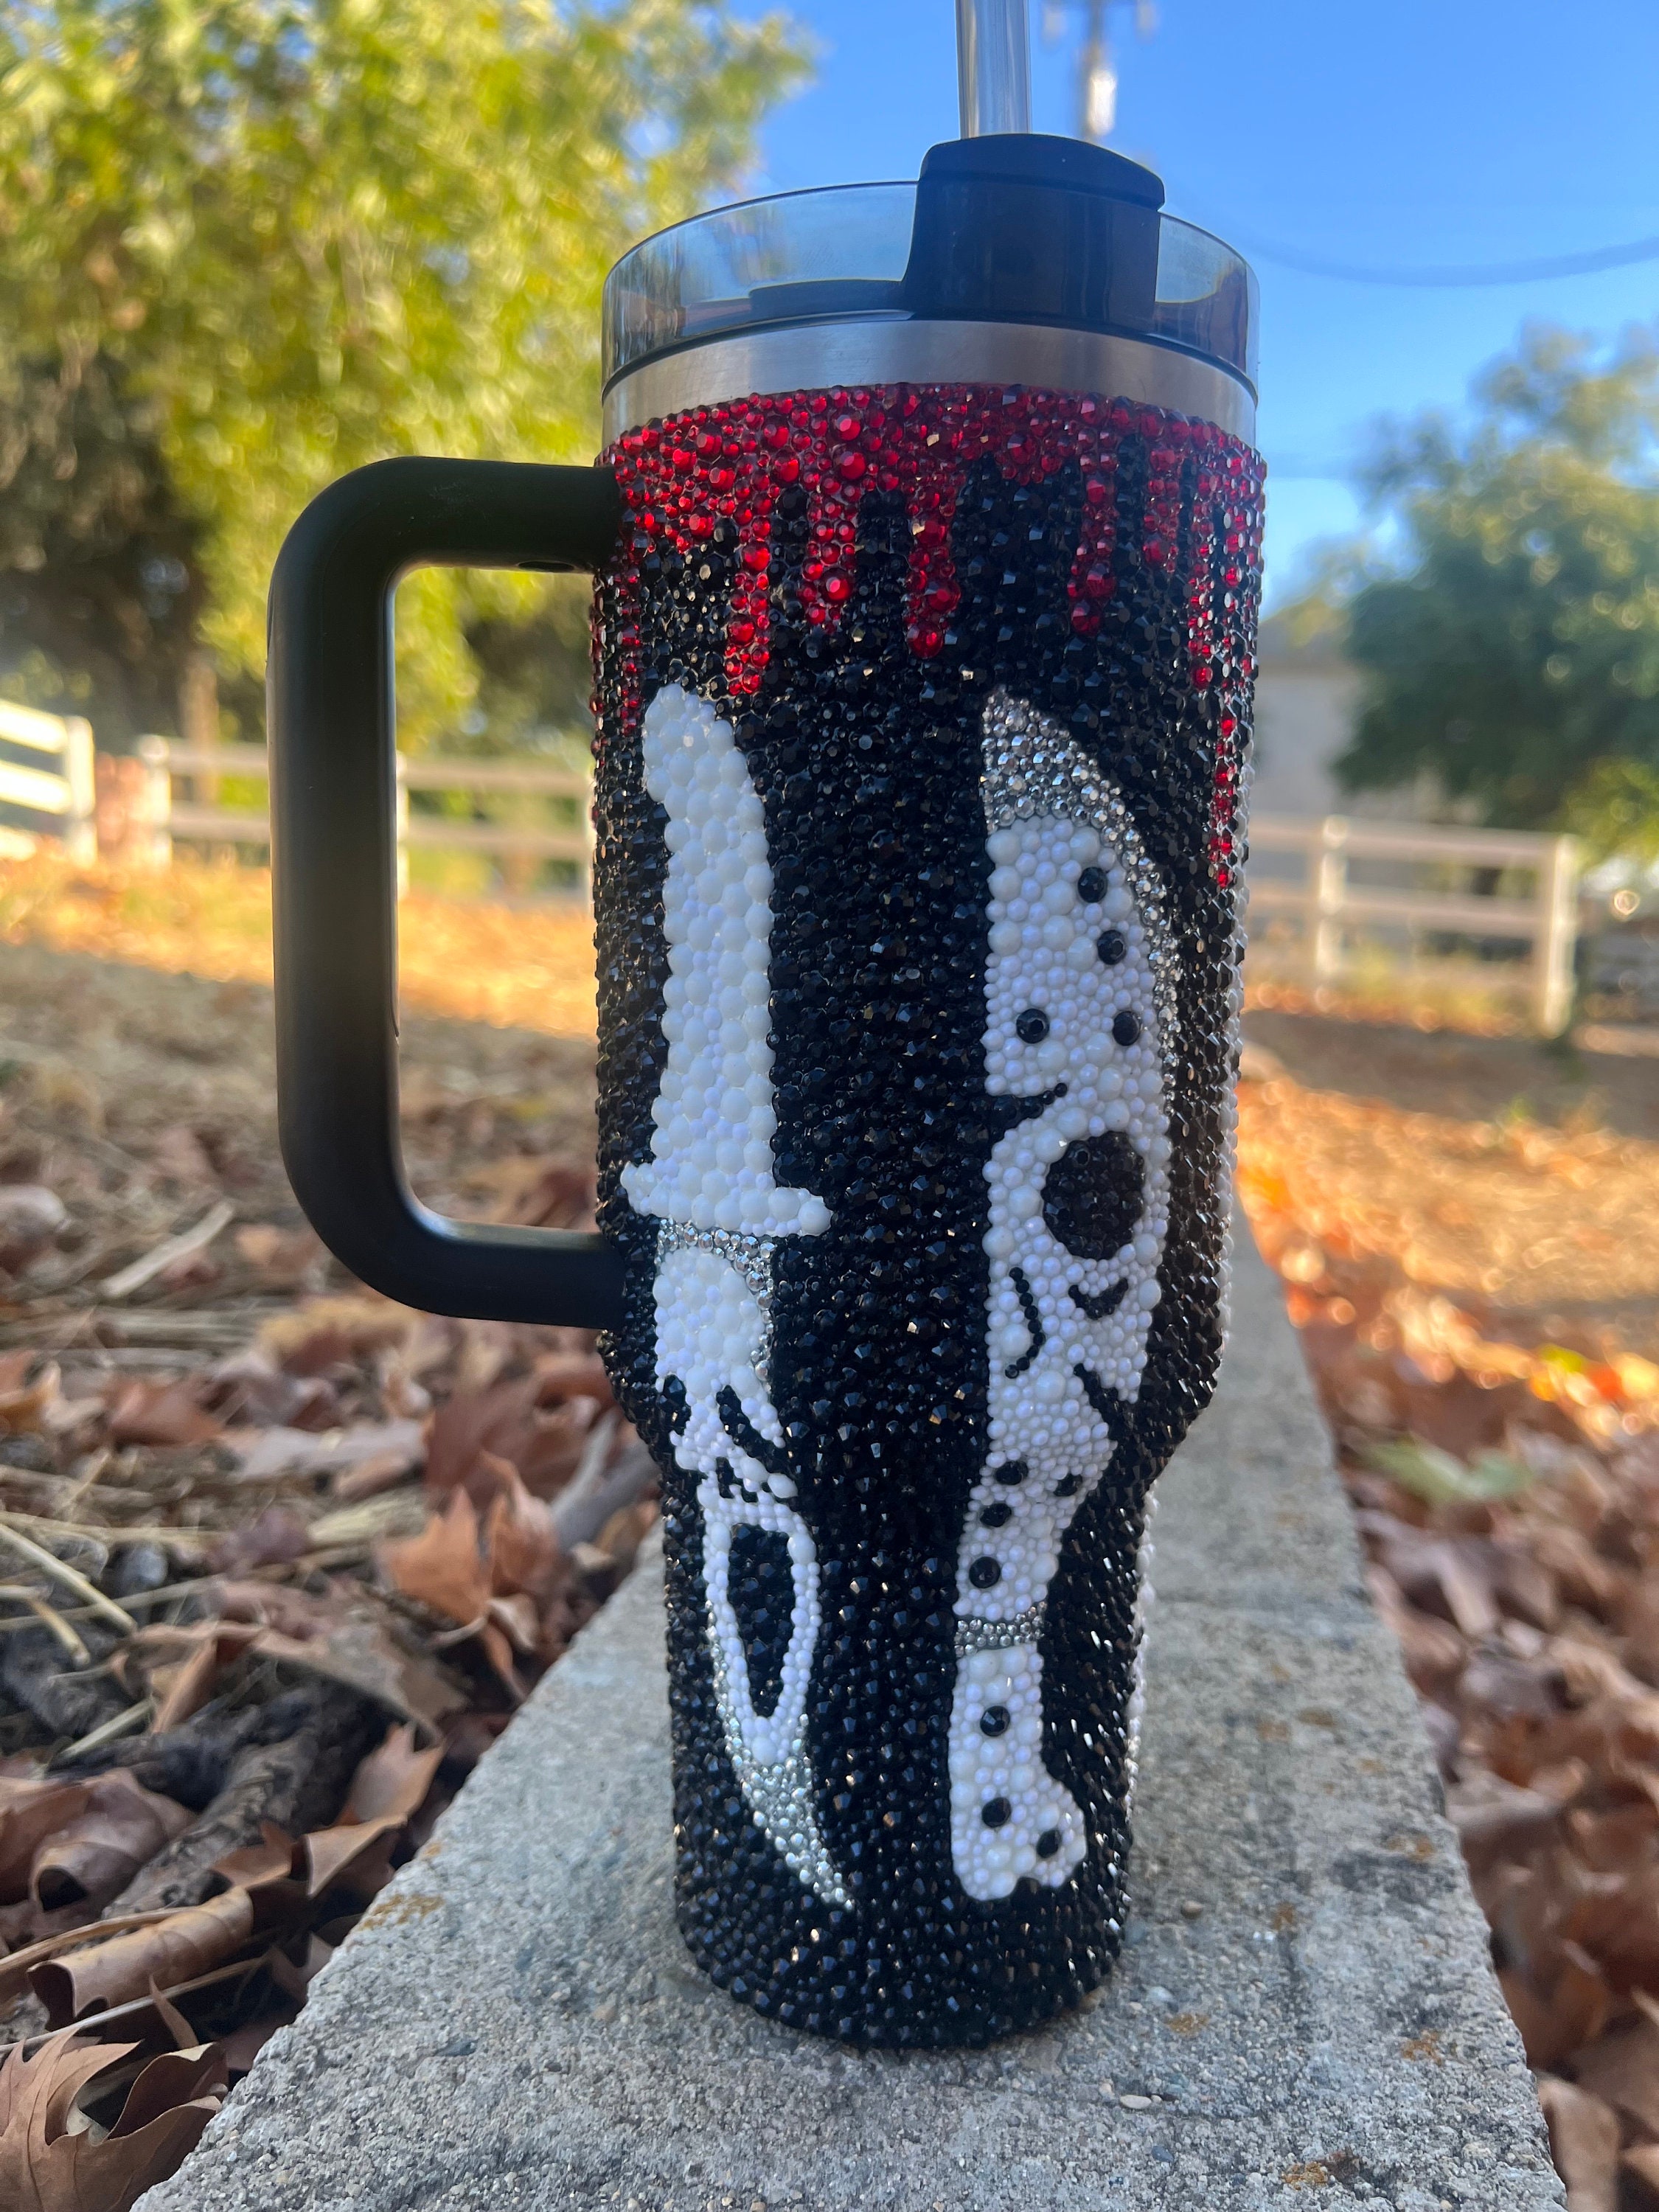 Just Dropped Spooky New $8 Stanley Tumbler Accessories Just